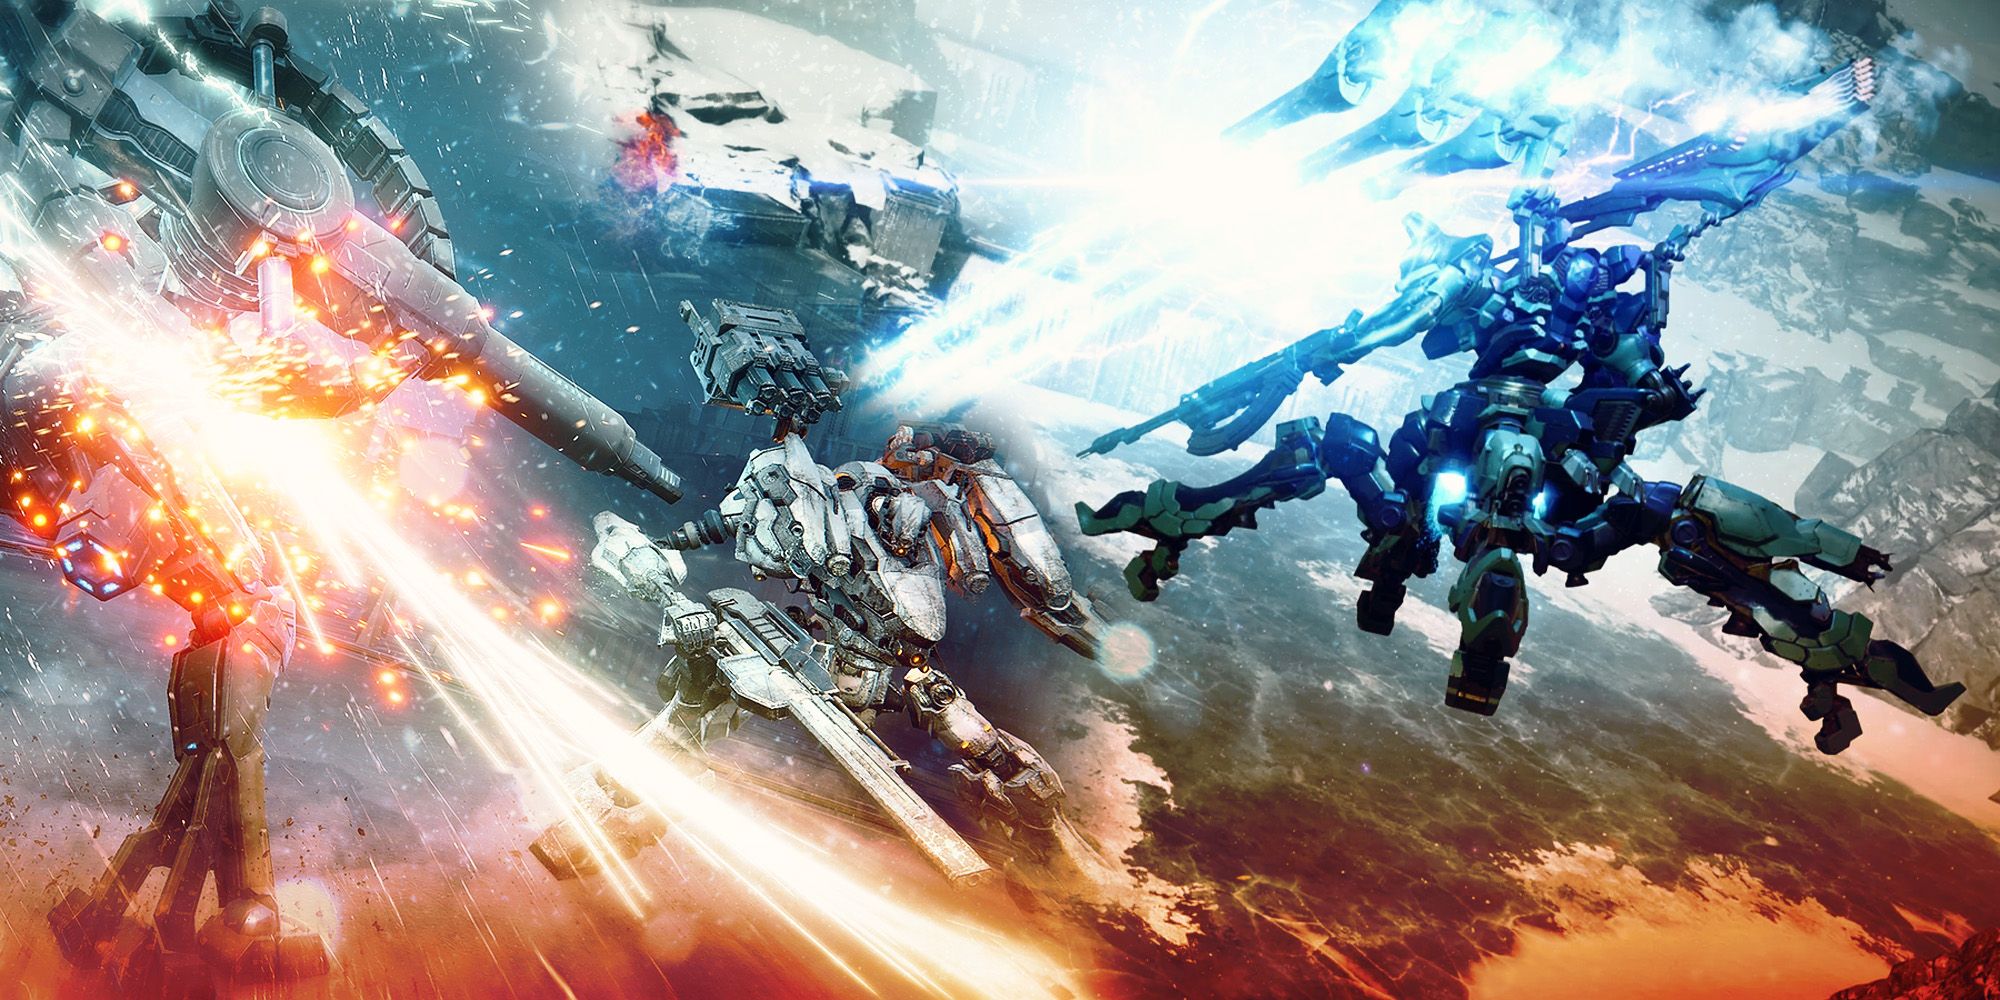 A collage of scenes from Armored Core 6, showing a variety of mechs battling with different melee and ranged weapons.